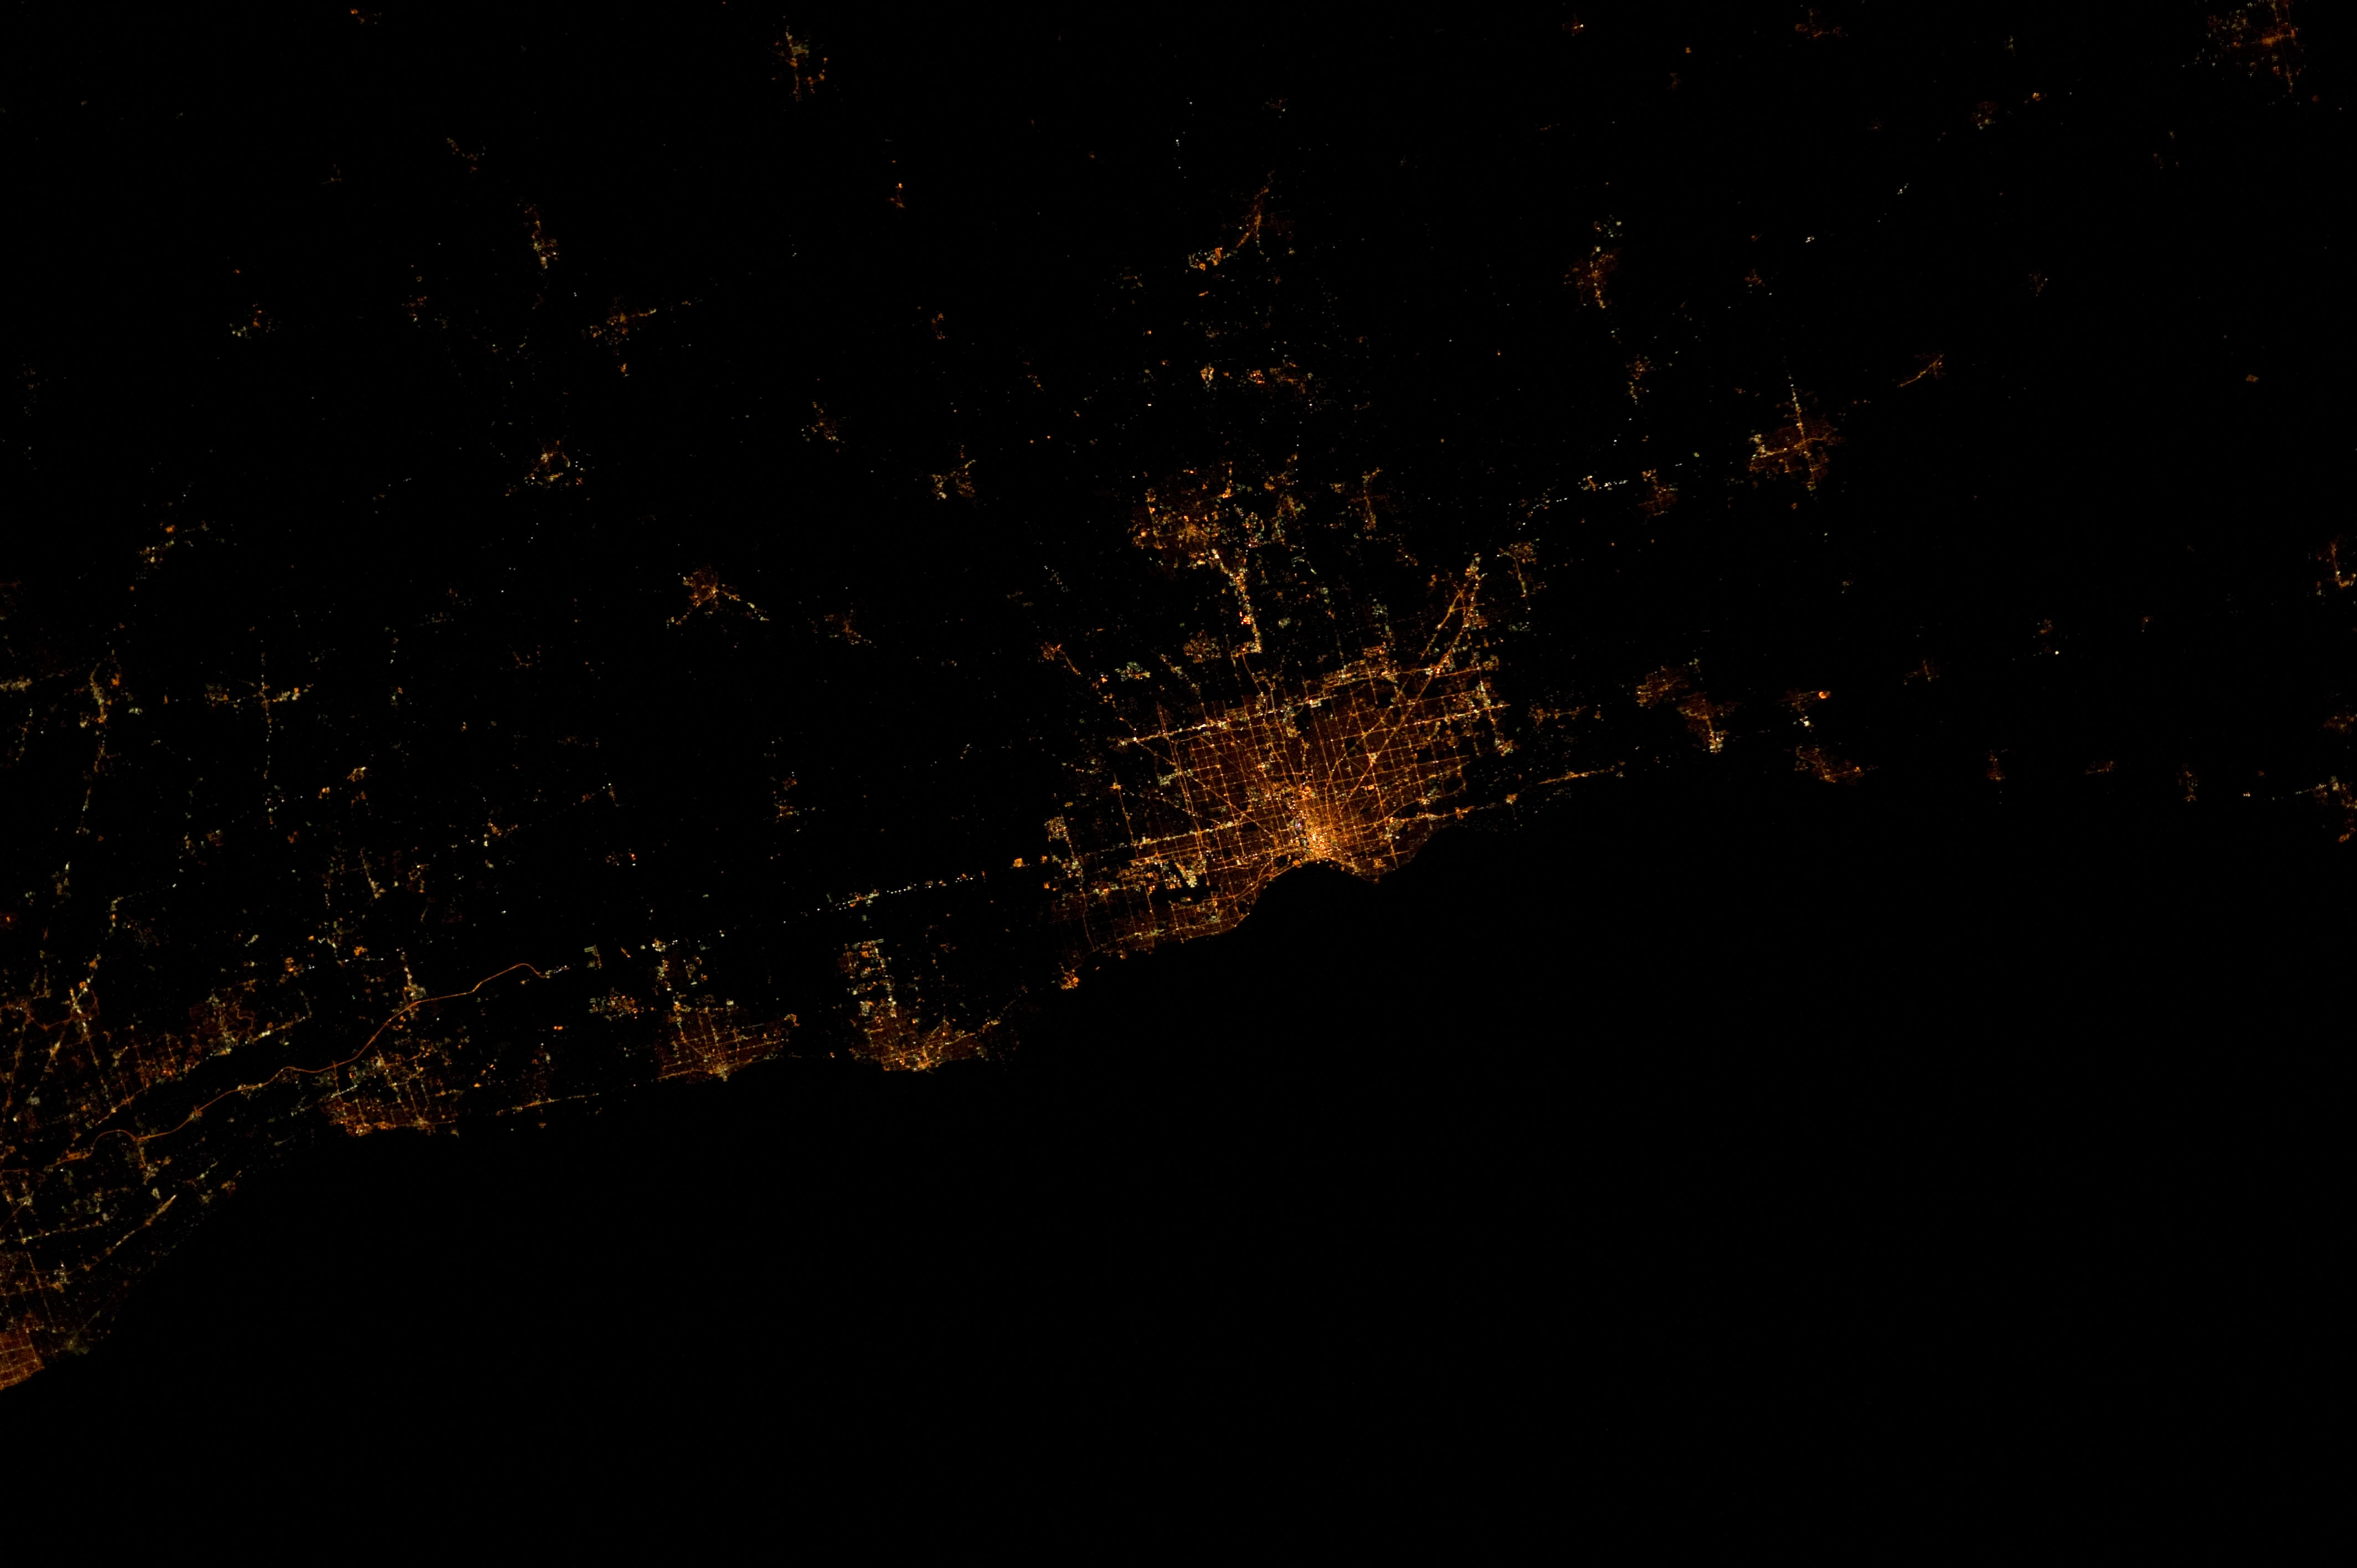 Elkhorn, 11:23:40 PM CDT in 2012 during Expedition 30 at the International Space Station